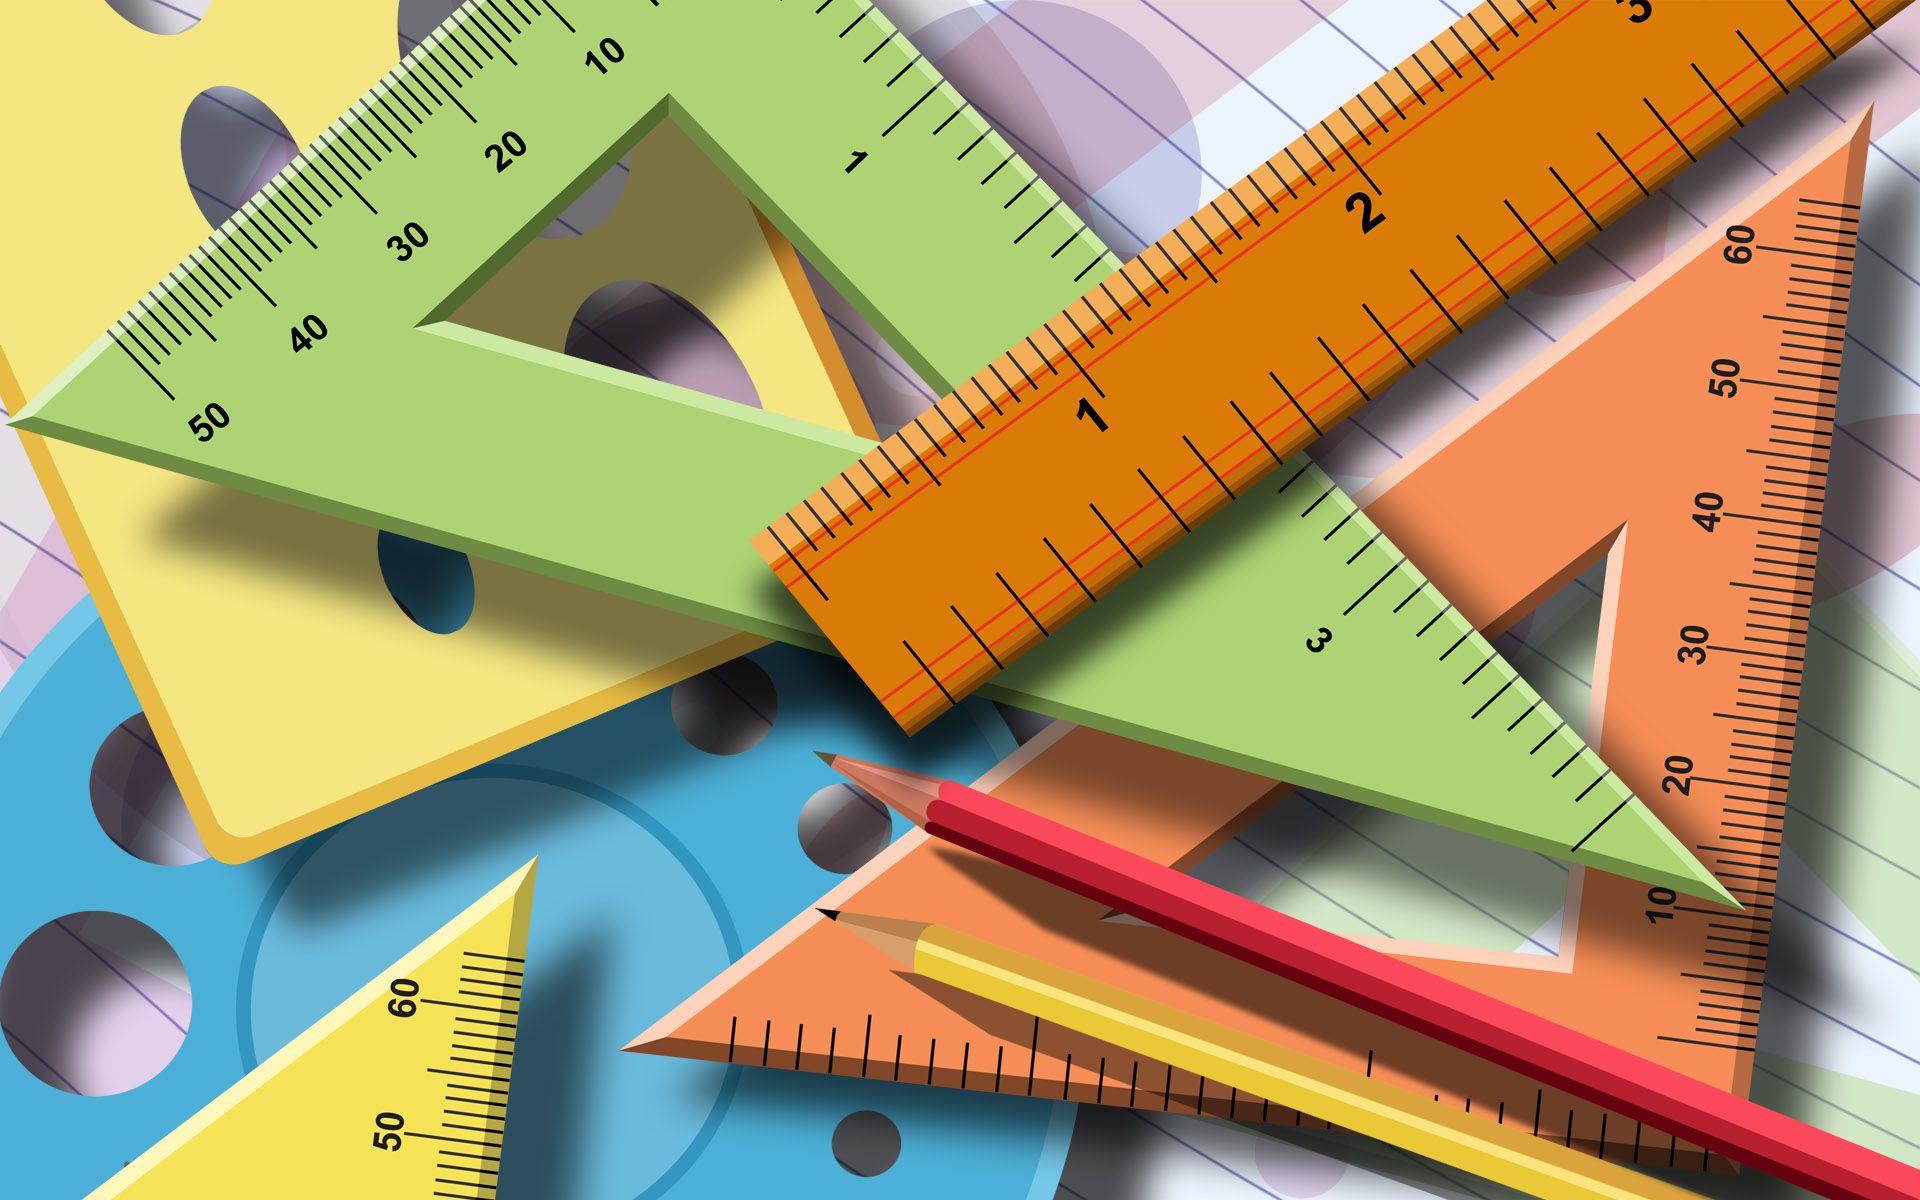 A pile of colorful rulers and pencils on top of lined paper. - Math